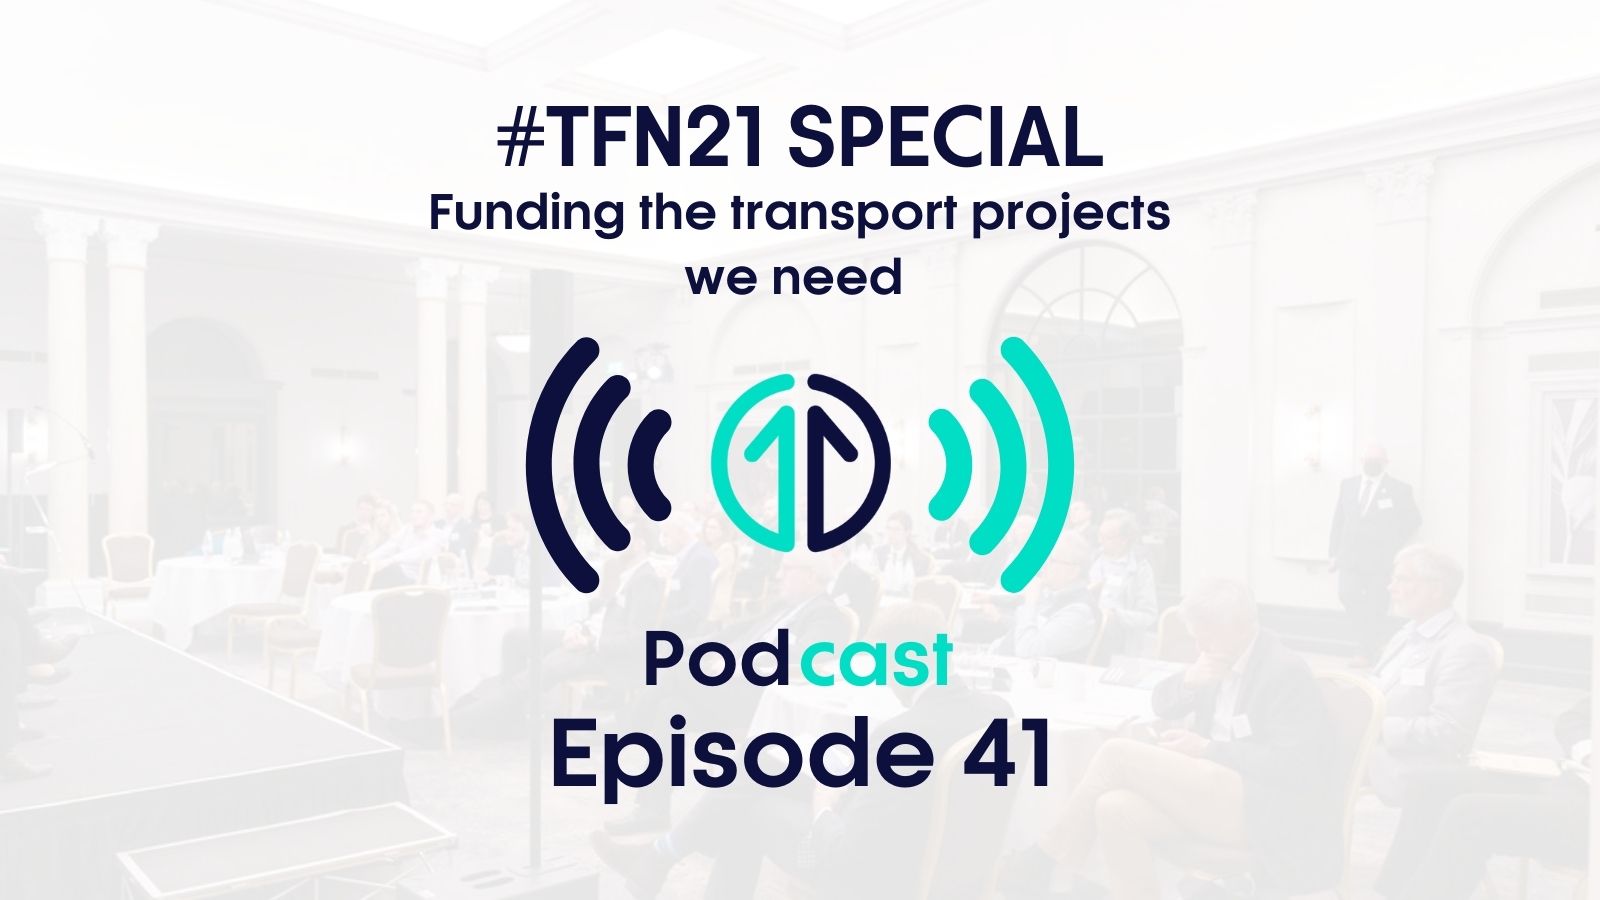 #TfN21 Annual Conference Special: Funding the transport projects we need | Episode 41